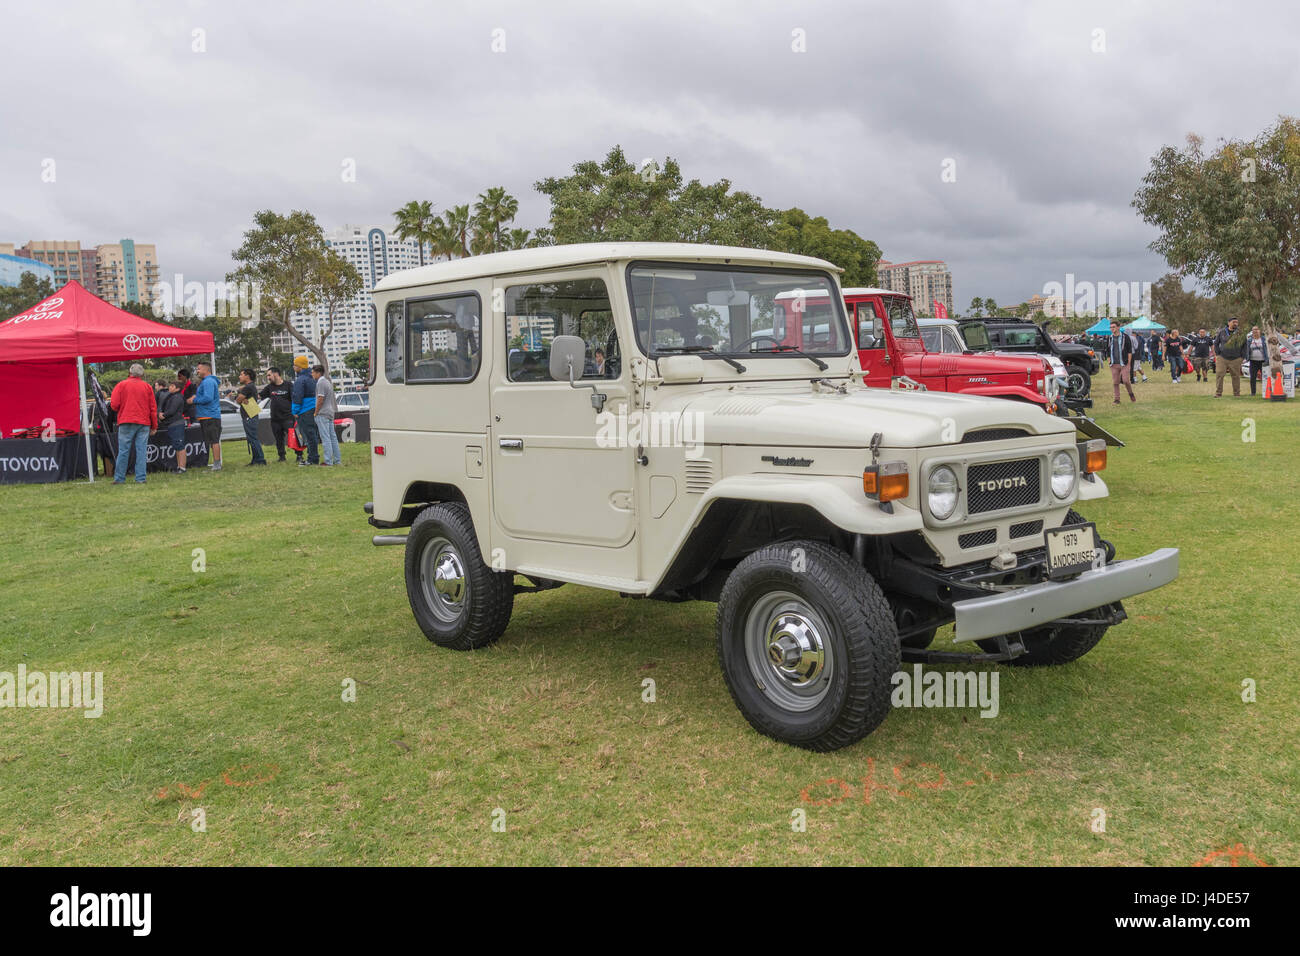 Long Beach, USA - May 6 2017: Toyota FJ40 Land Cruiser 1979 on display during the 22nd annual All Toyotafest. Stock Photo